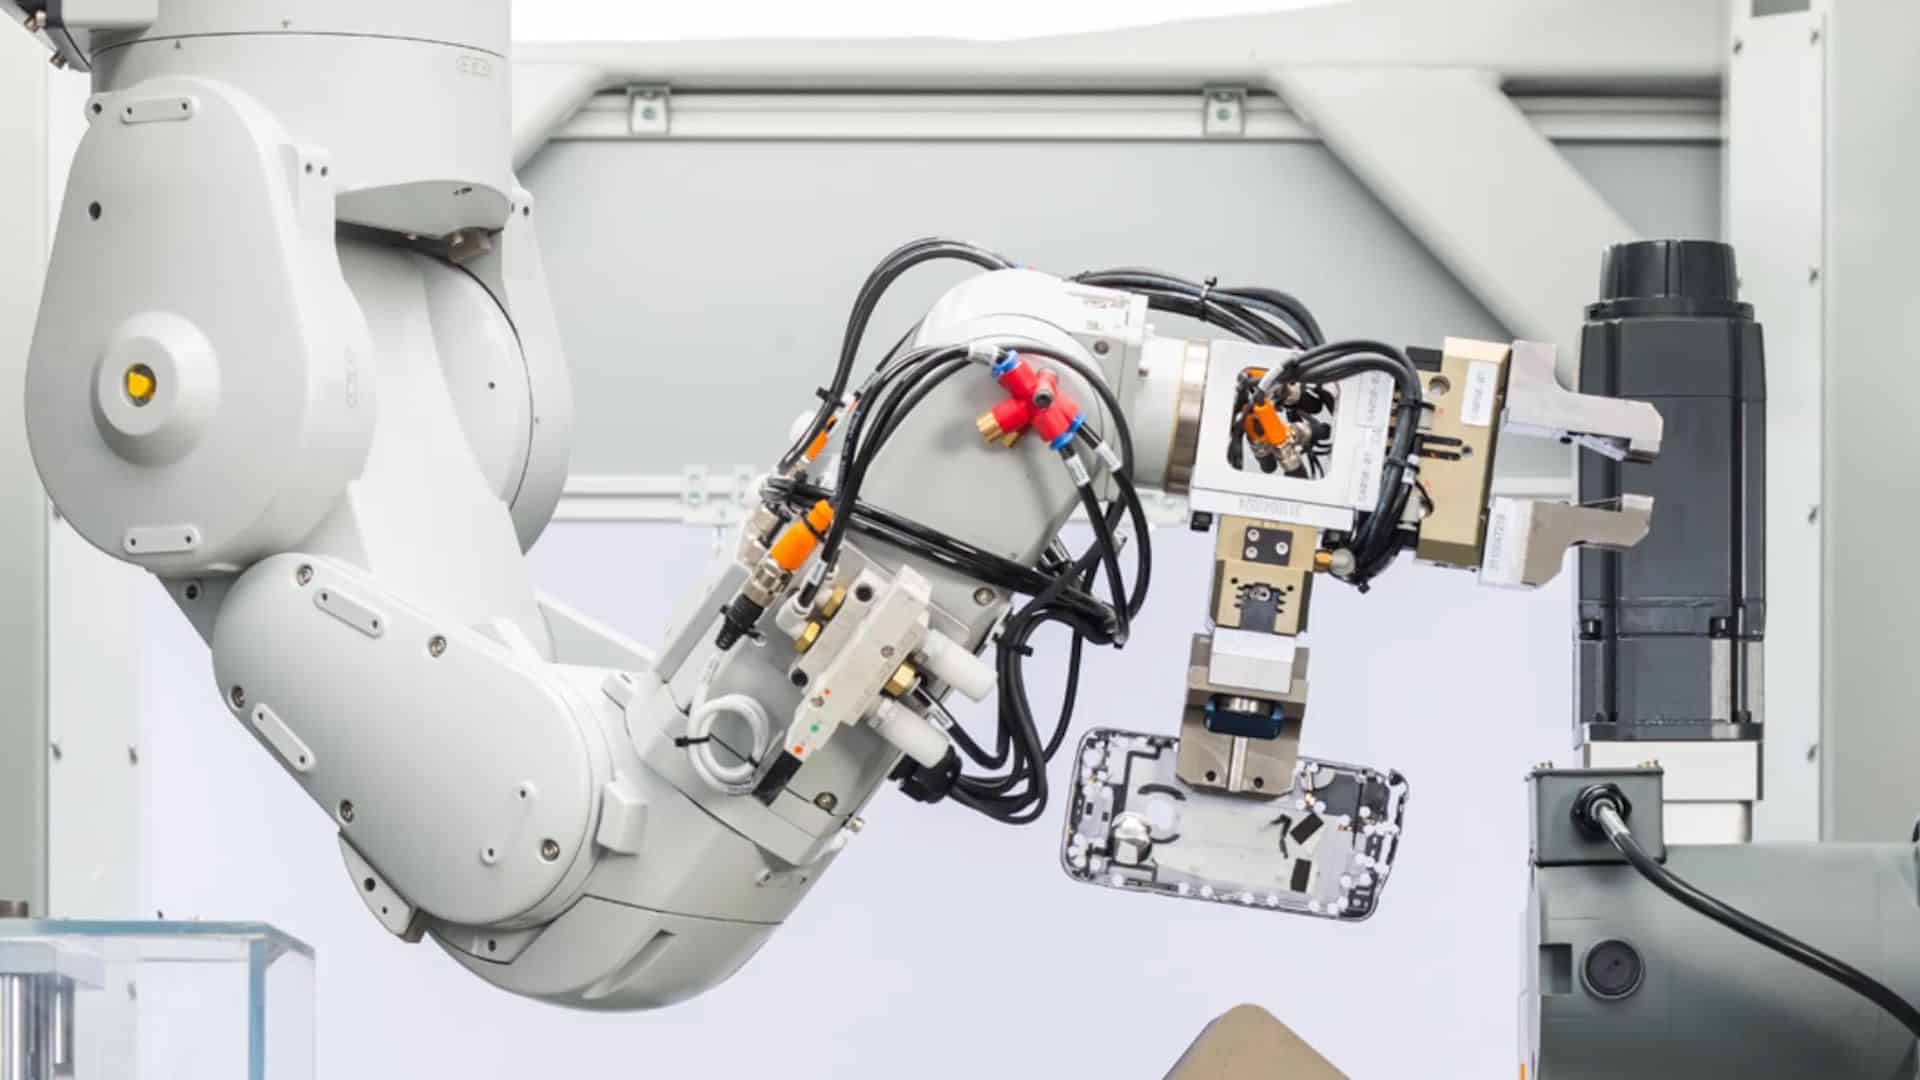 Apple's Daisy is a prototype recycling robot that can disassemble nine types of iPhone and sort the parts for recycling